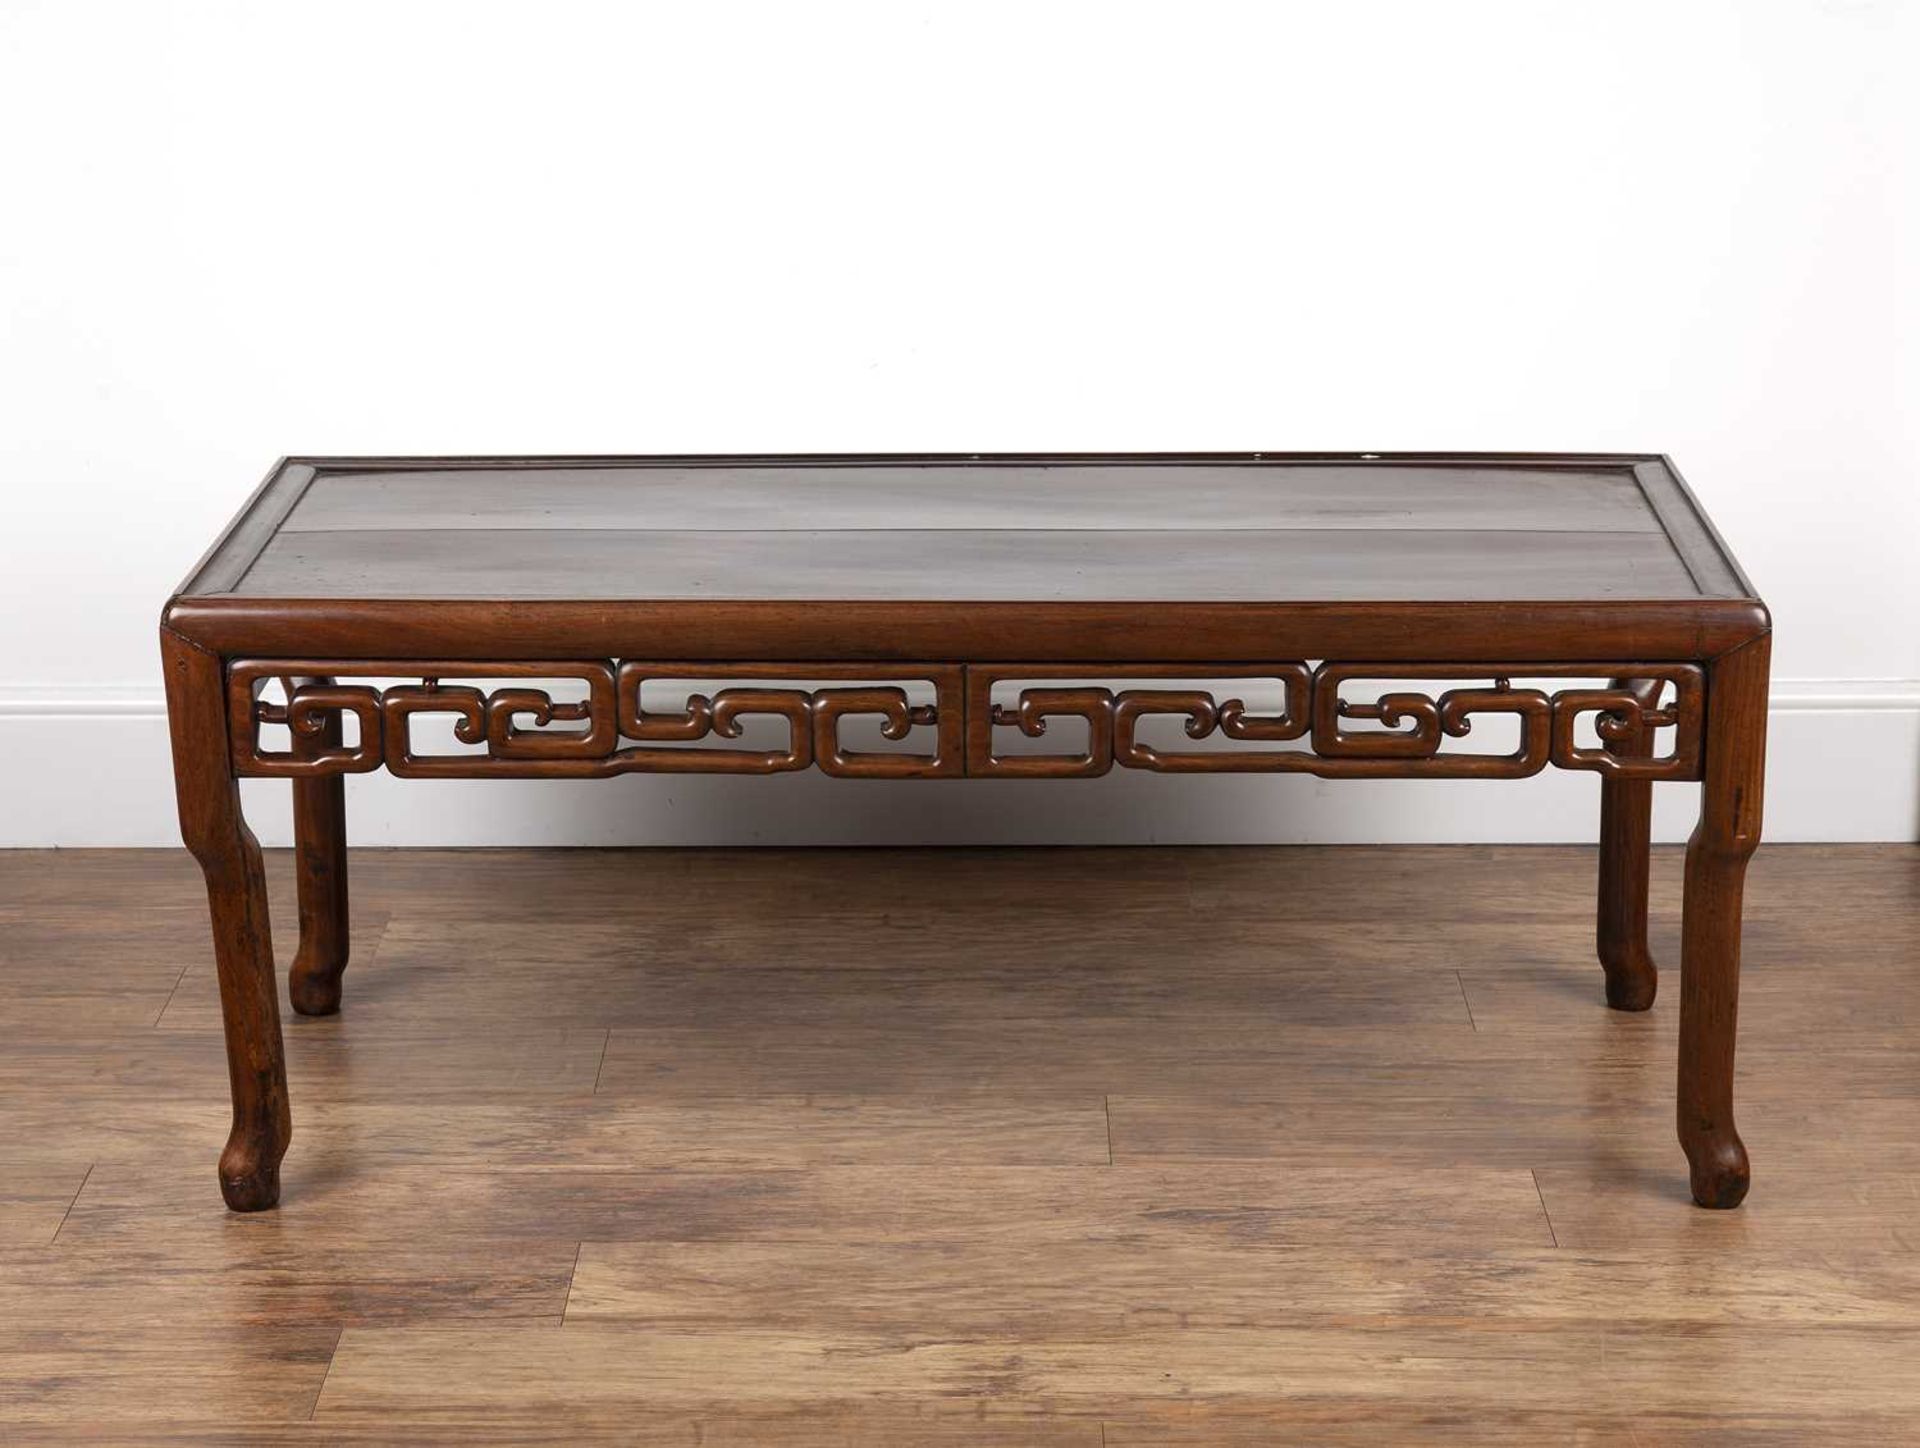 Chinese Hardwood low table 19th Century, with scroll frieze and shaped supports, 127cm long, 56cm